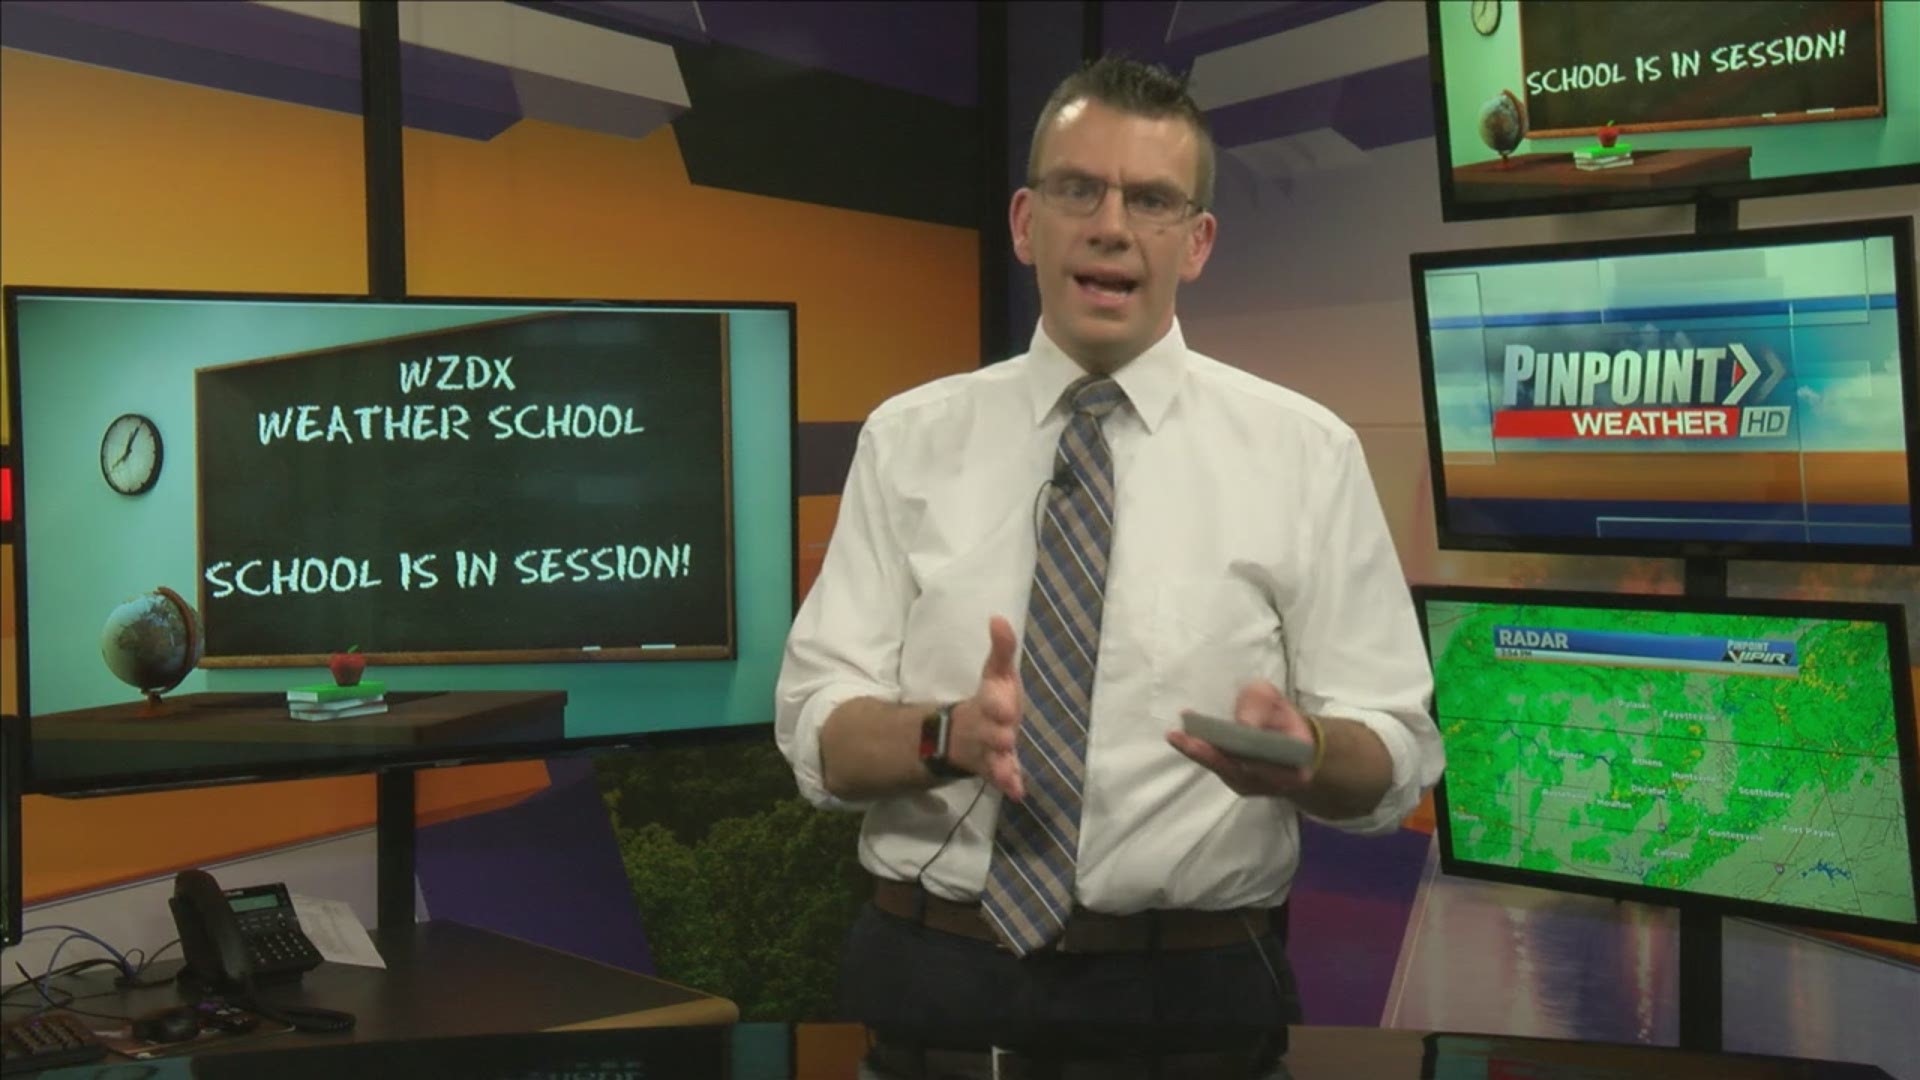 On This day of weather school, we talk about tornadoes